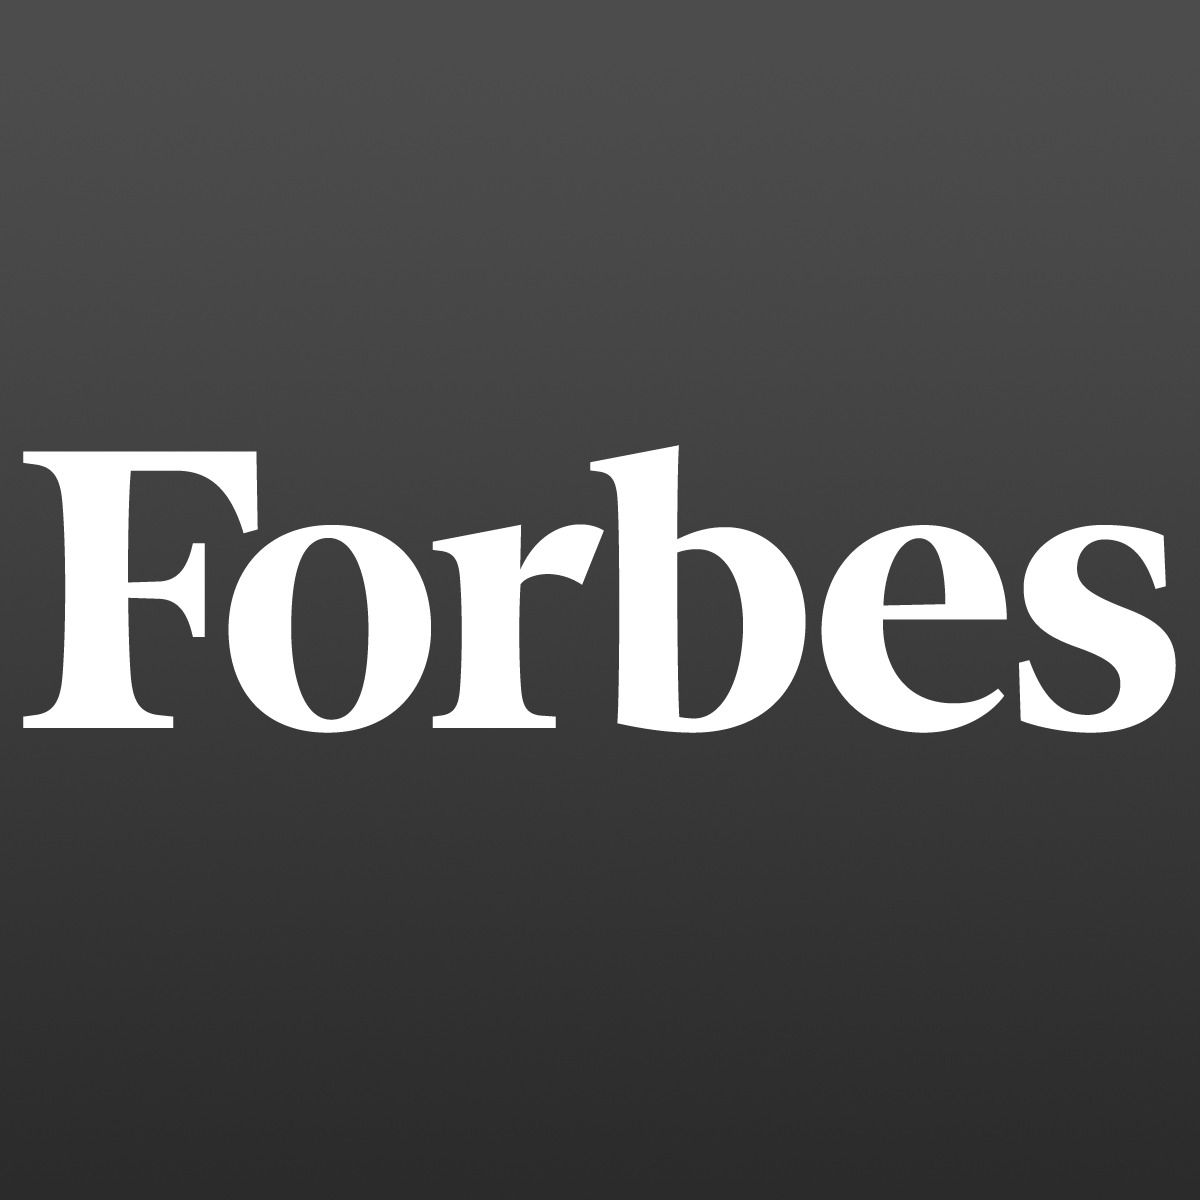 Forbes: The First Step of Business Model Innovation – Focus